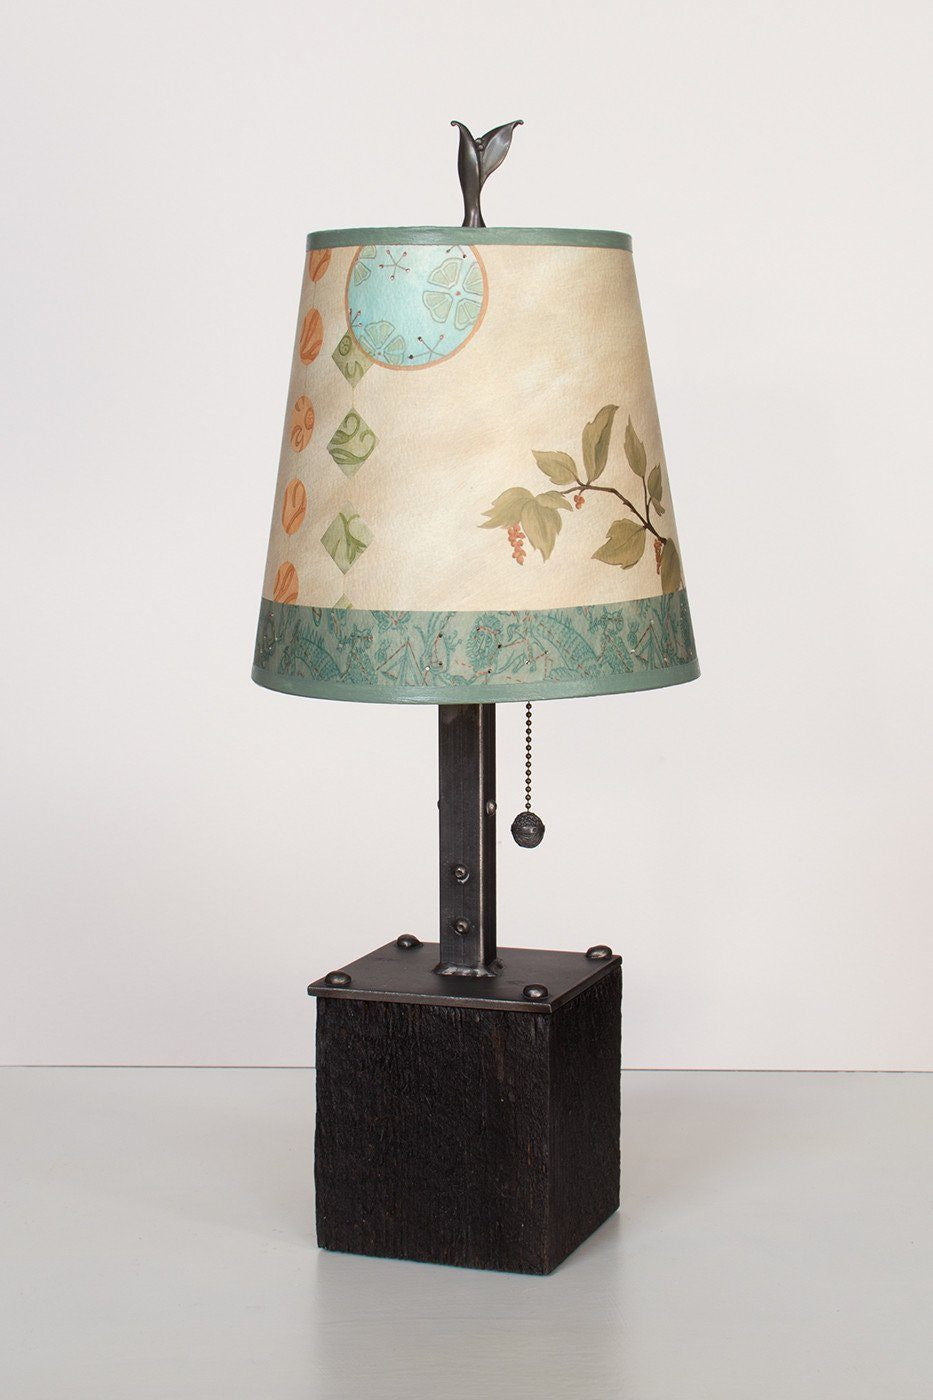 Steel Table Lamp on Reclaimed Wood with Small Drum Shade in Celestial Leaf